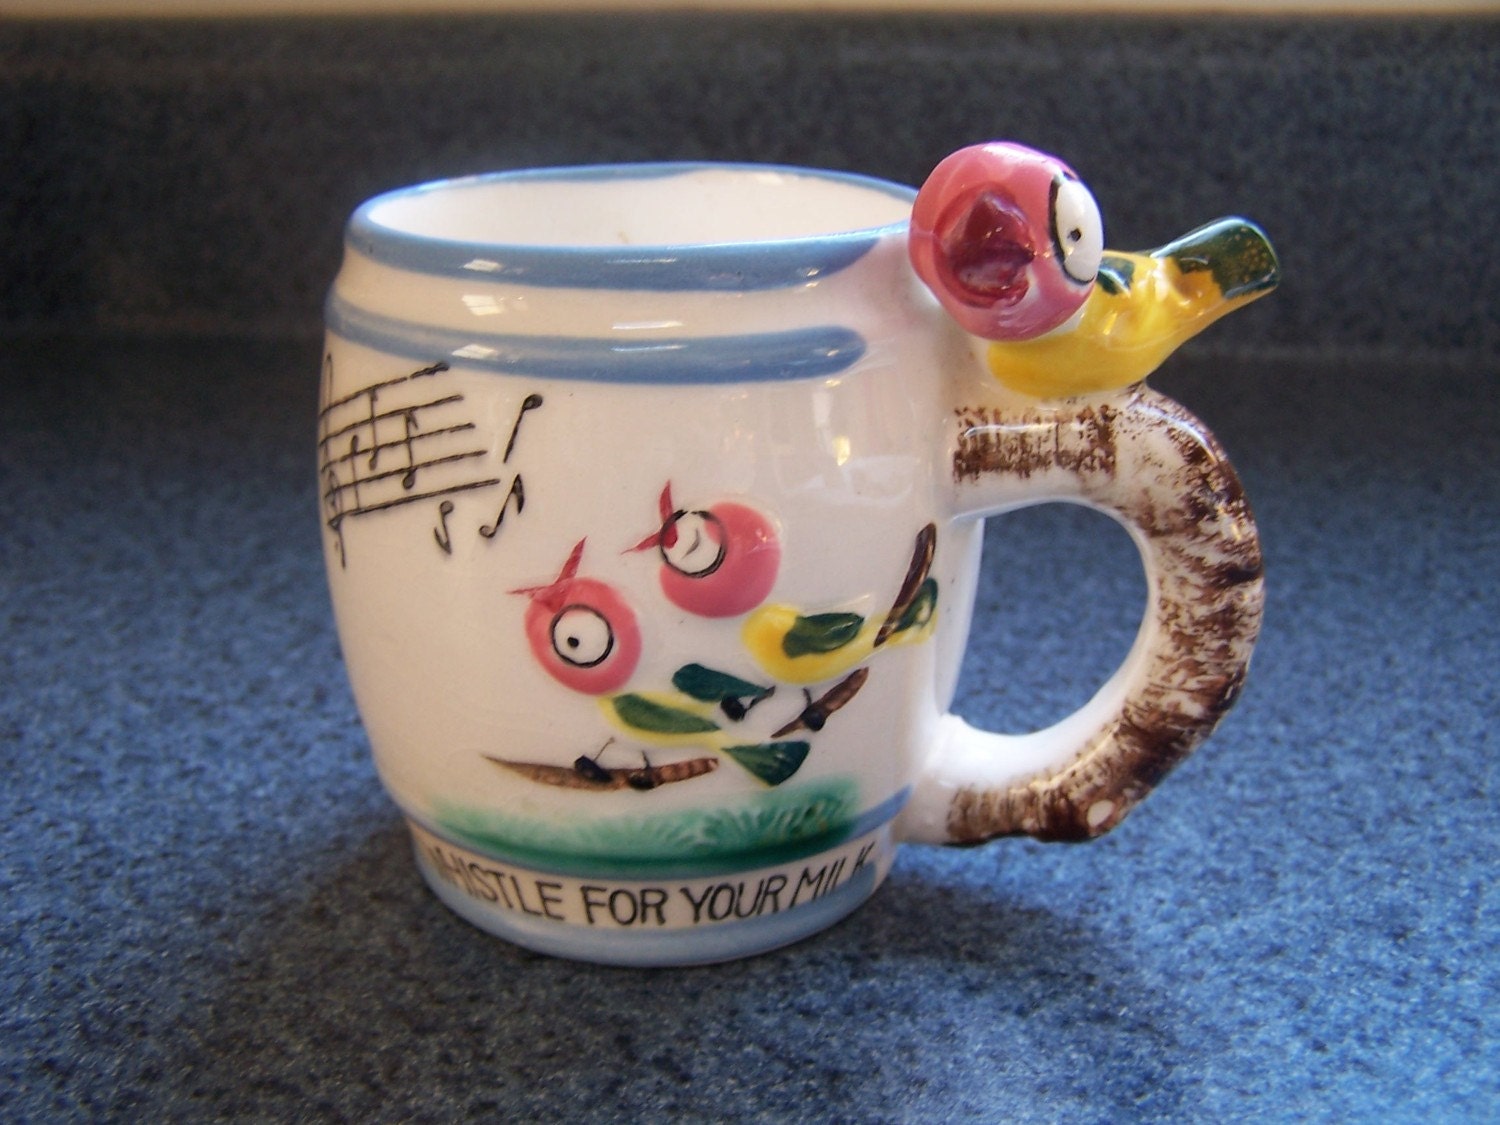 vintage WITH whistle VINTAGE CHILDS ArtisticEndeavors1 CUP BIRD by  WHISTLE FOR cup